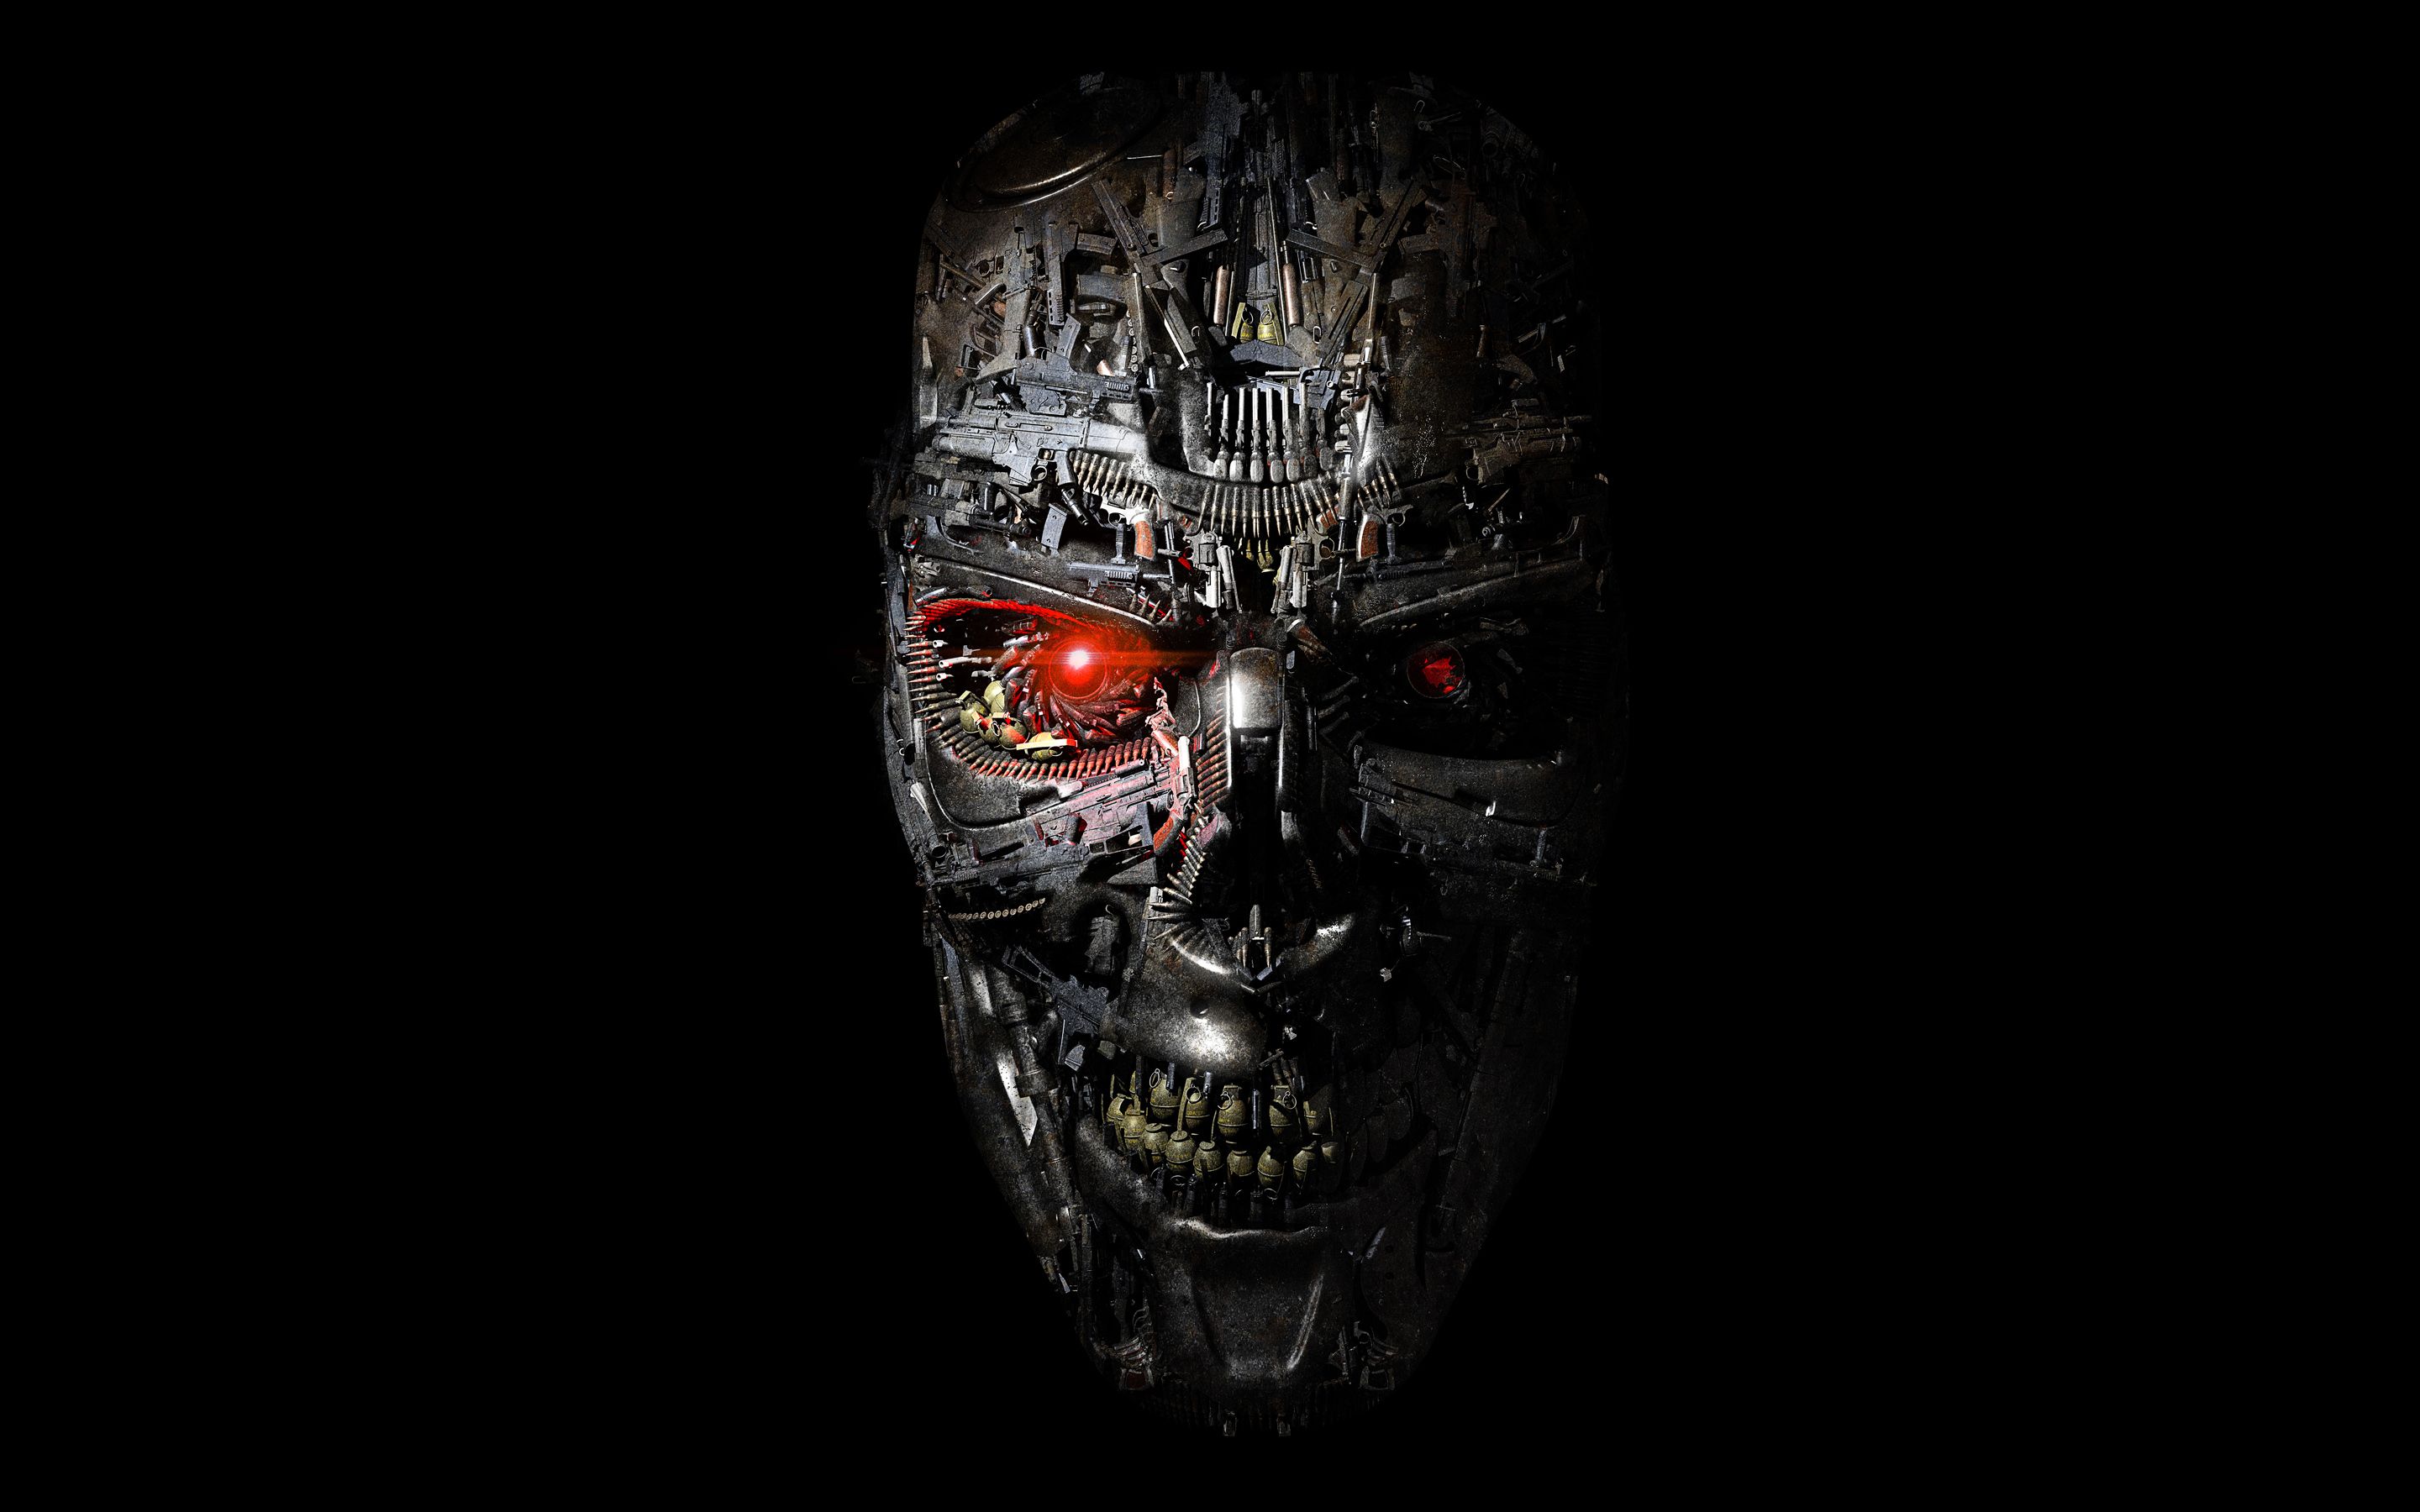 Robot 4K wallpaper for your desktop or mobile screen free and easy to download